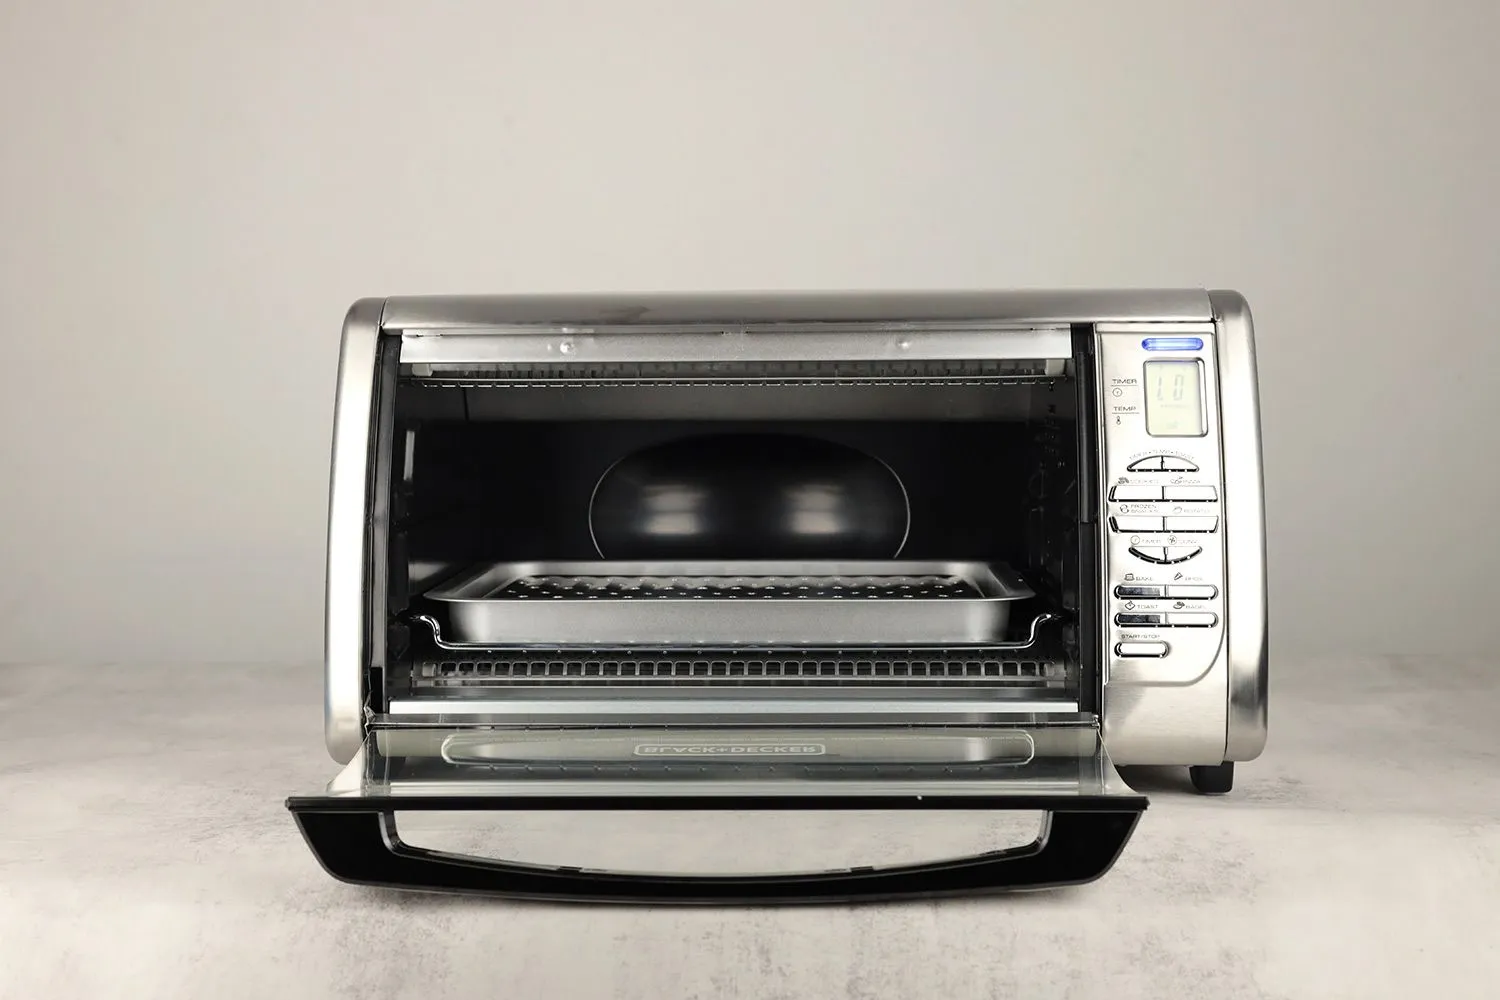 Black And Decker Convection Toaster Oven (CTO6335S) In-depth